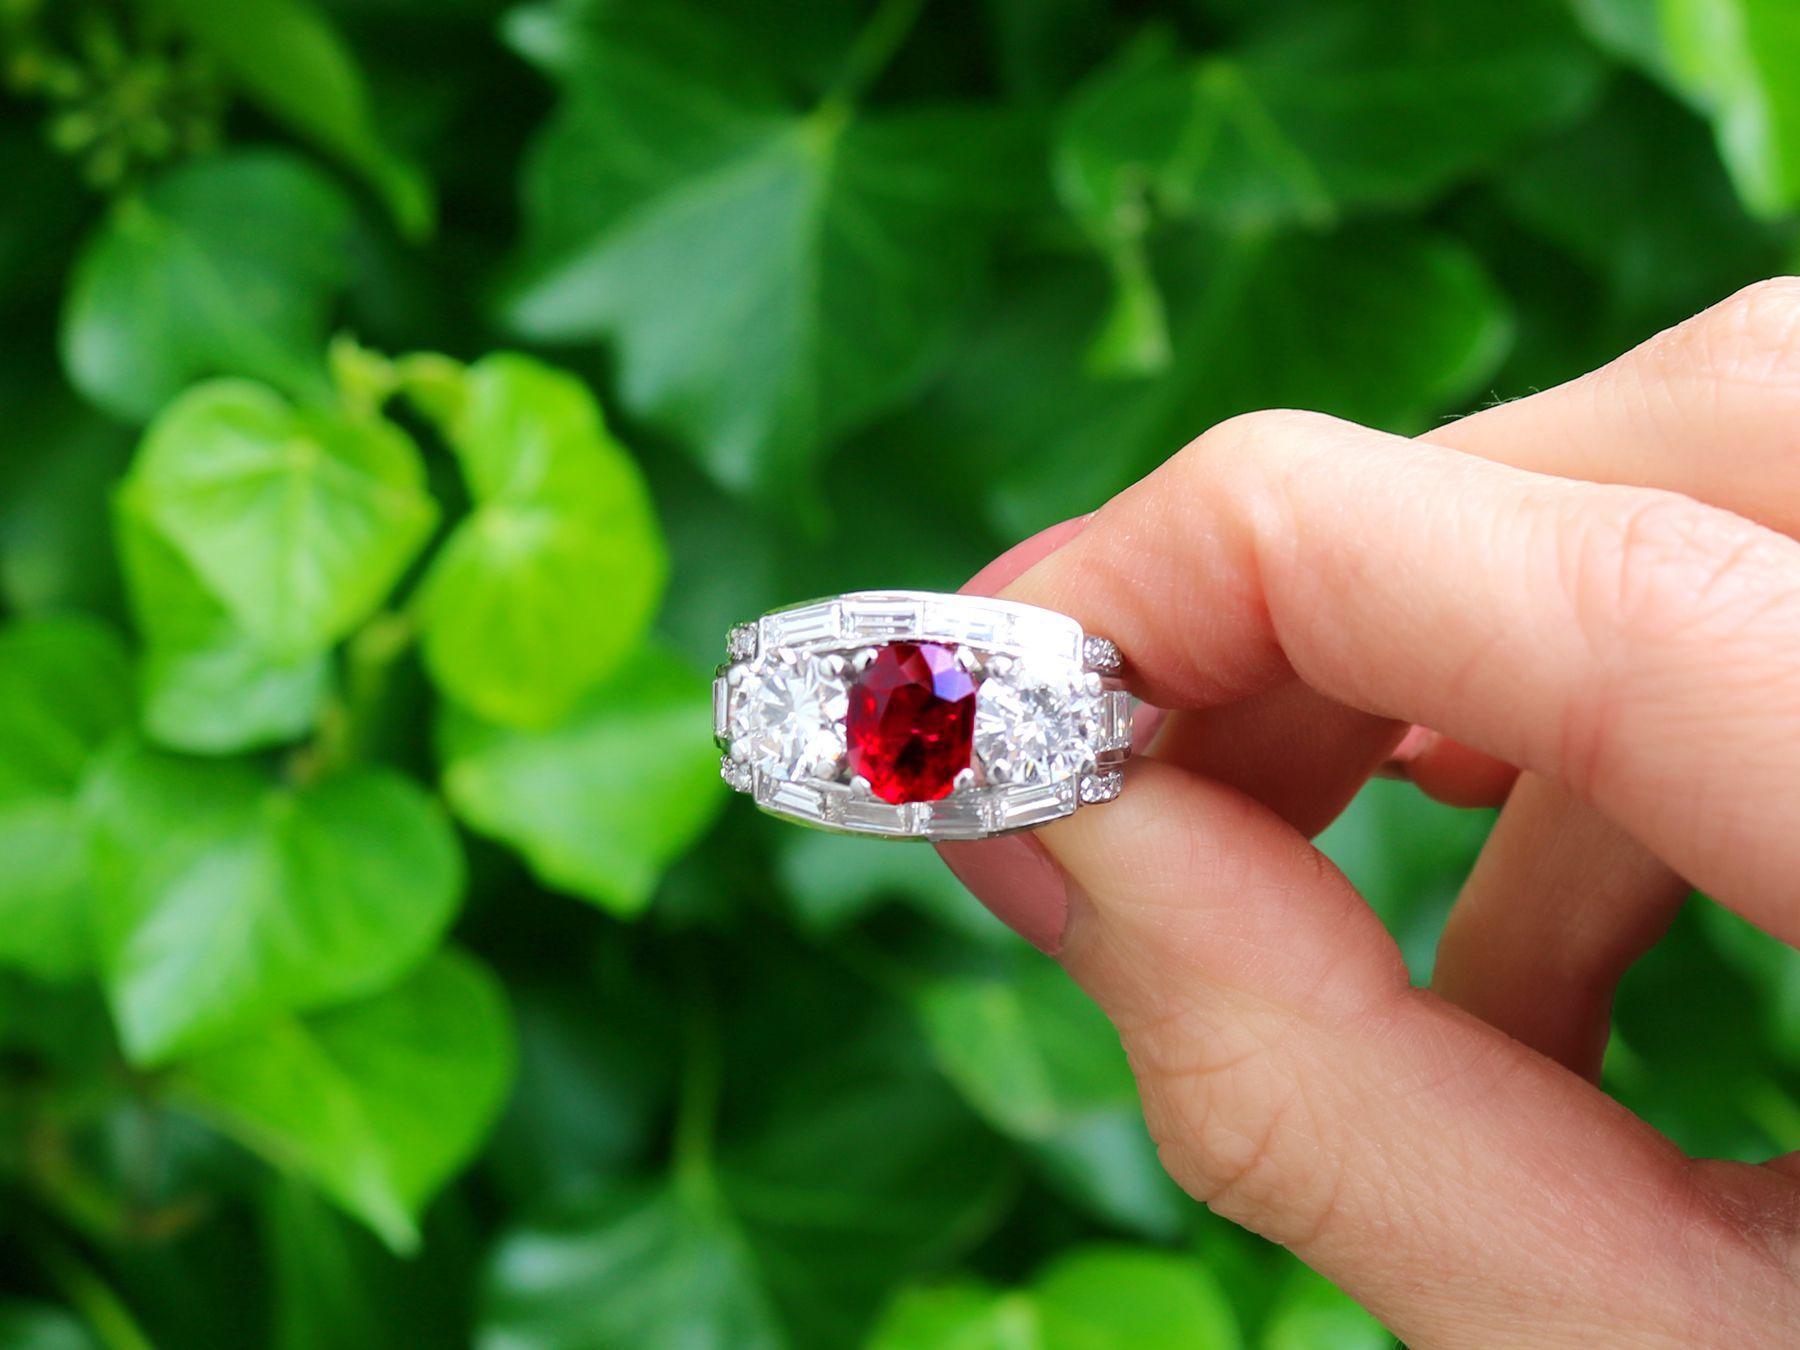 A stunning, fine and impressive vintage 1.70 carat Thai ruby and 3.02 carat diamond, platinum cocktail ring; part of our diverse vintage jewelry and collections.

This stunning vintage ruby ring has been crafted in platinum.

The substantial,